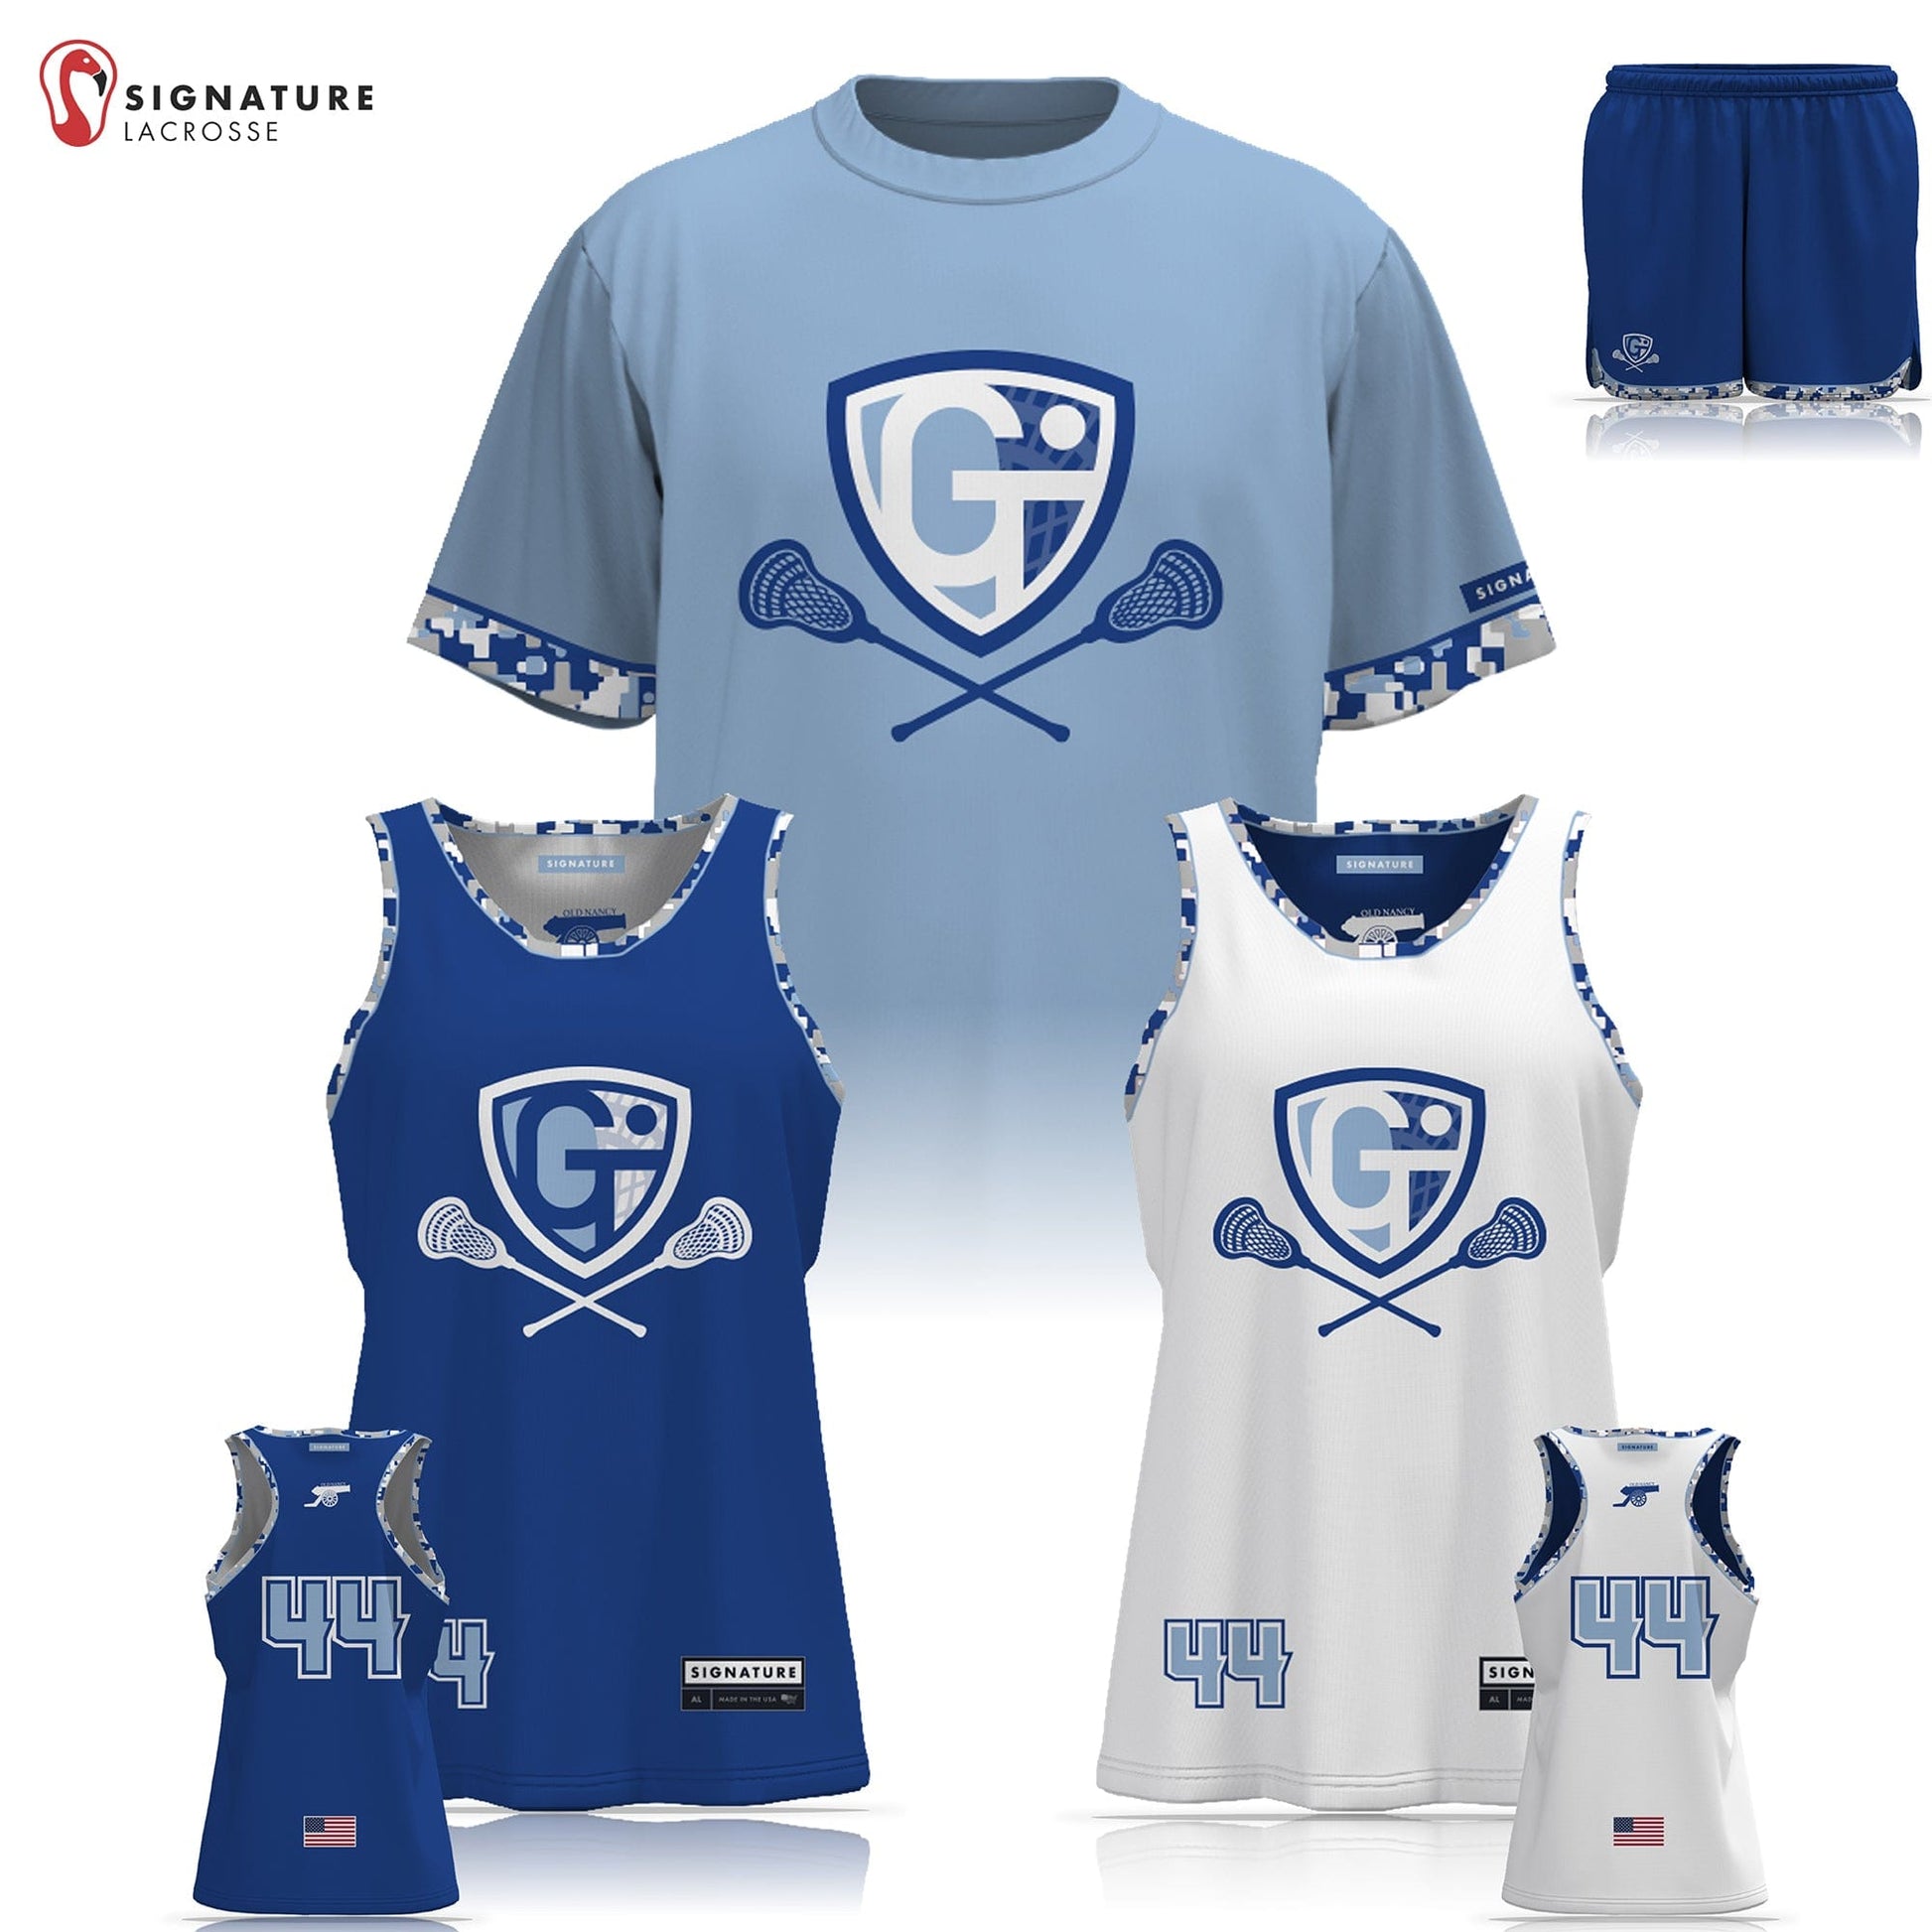 Georgetown-Triton Youth Lacrosse Women's 3 Piece Player Game Package: 7-8 Signature Lacrosse